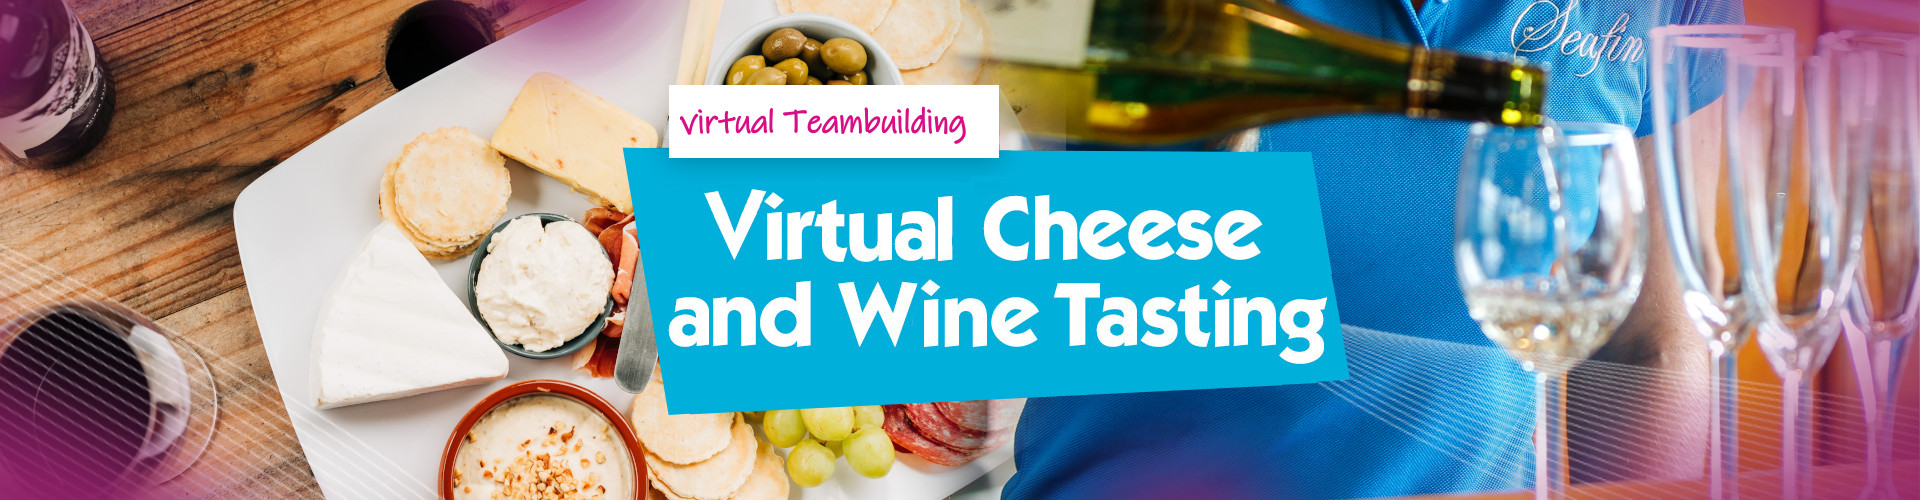 Virtual Cheese and Wine Tasting banner